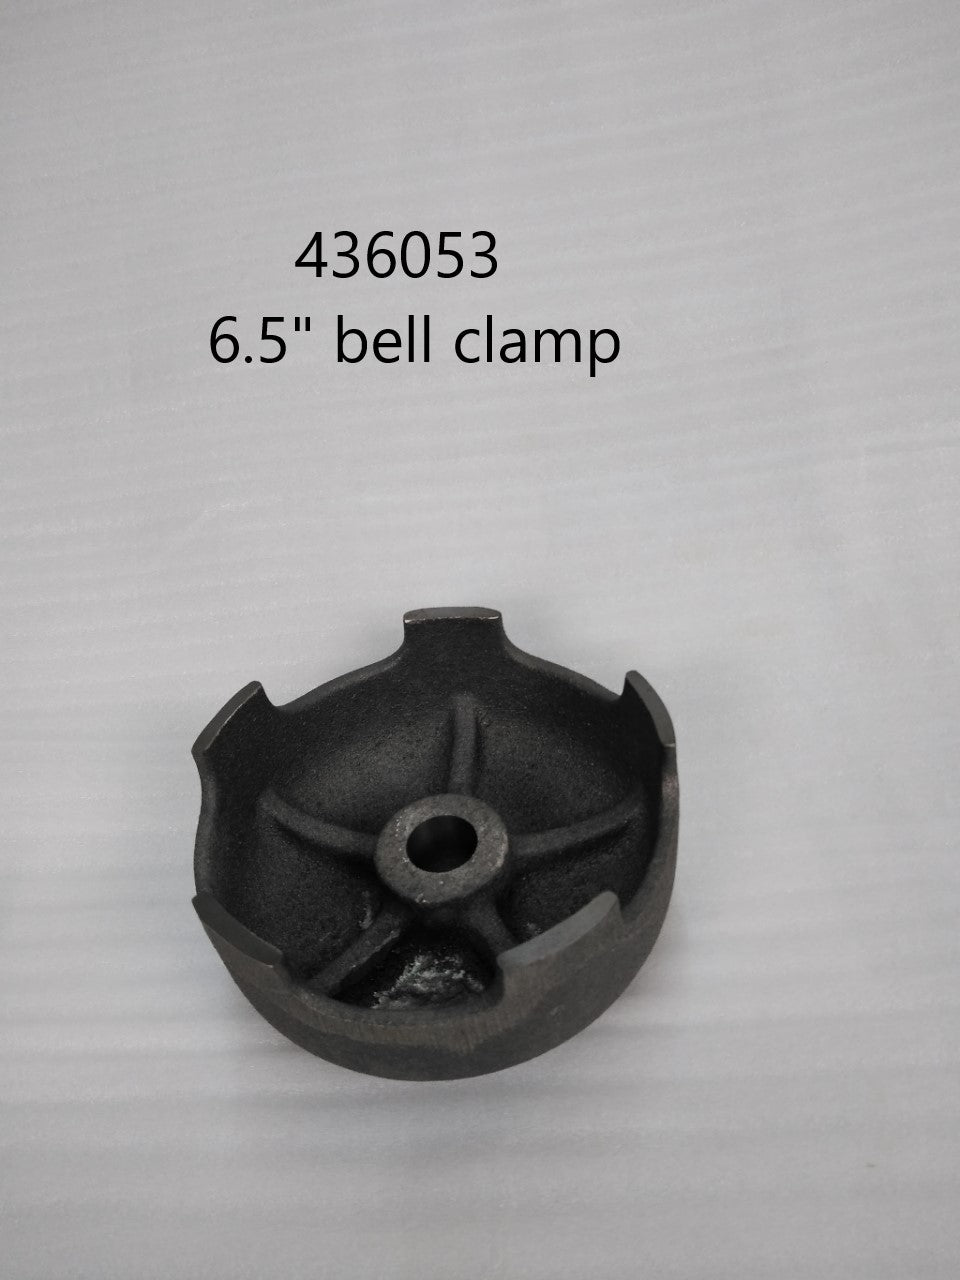 Bell Clamp 6.5"